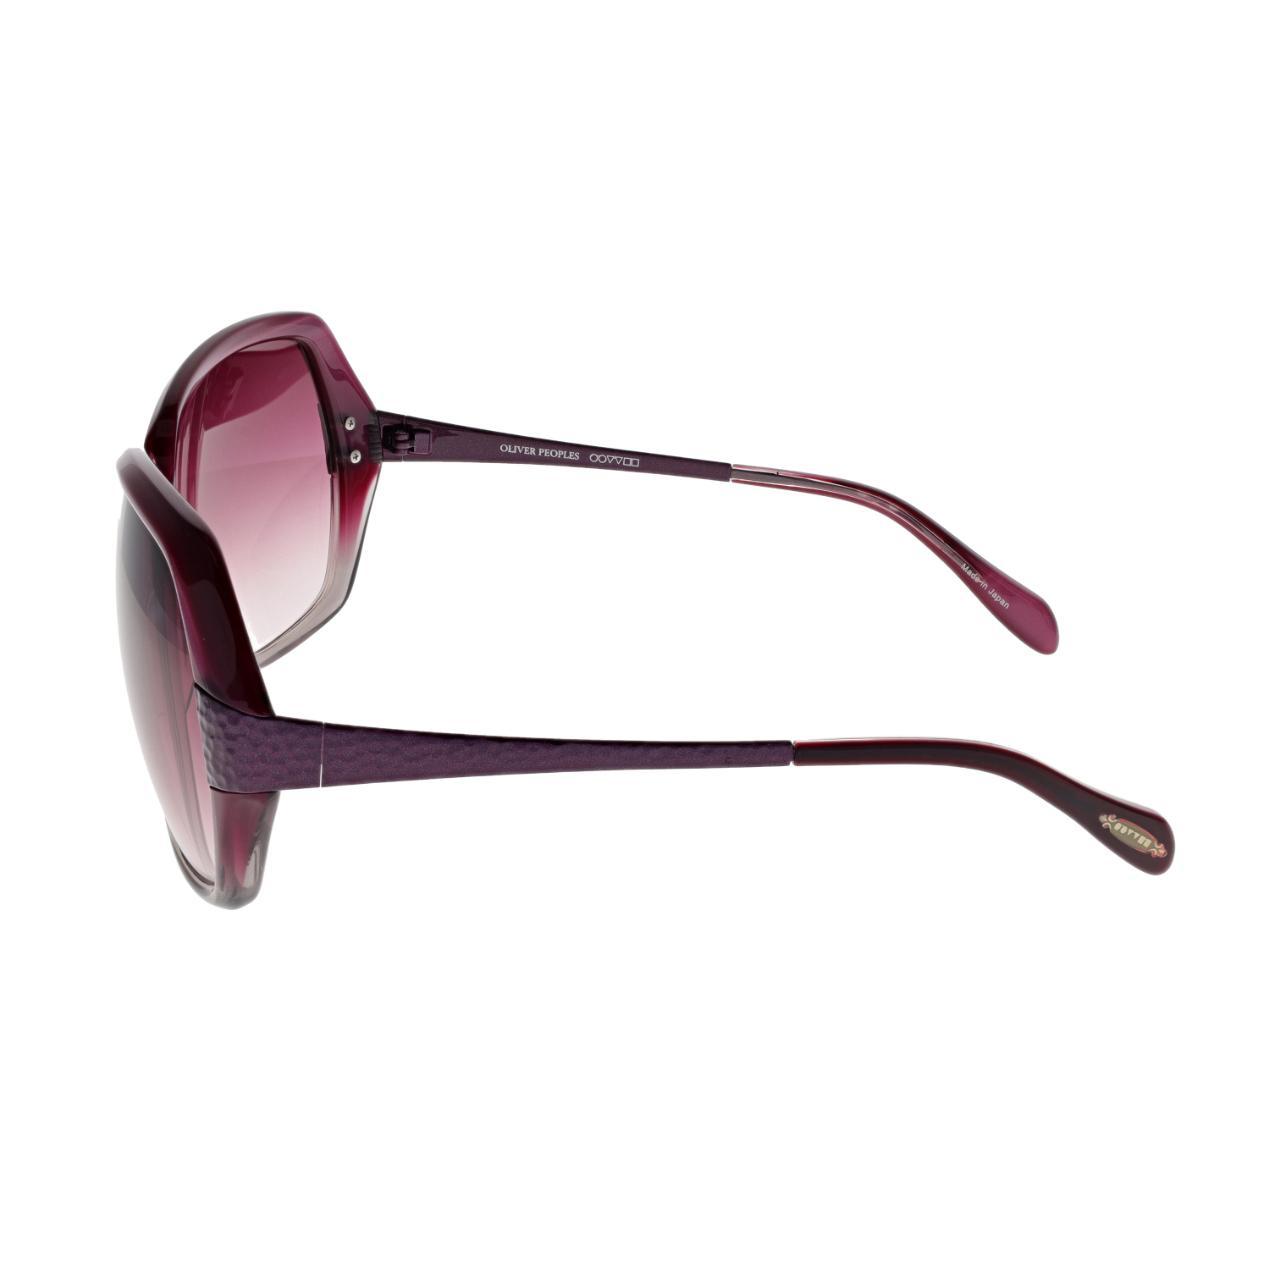 Oliver Peoples Women's Burgundy and Purple Sunglasses (3)